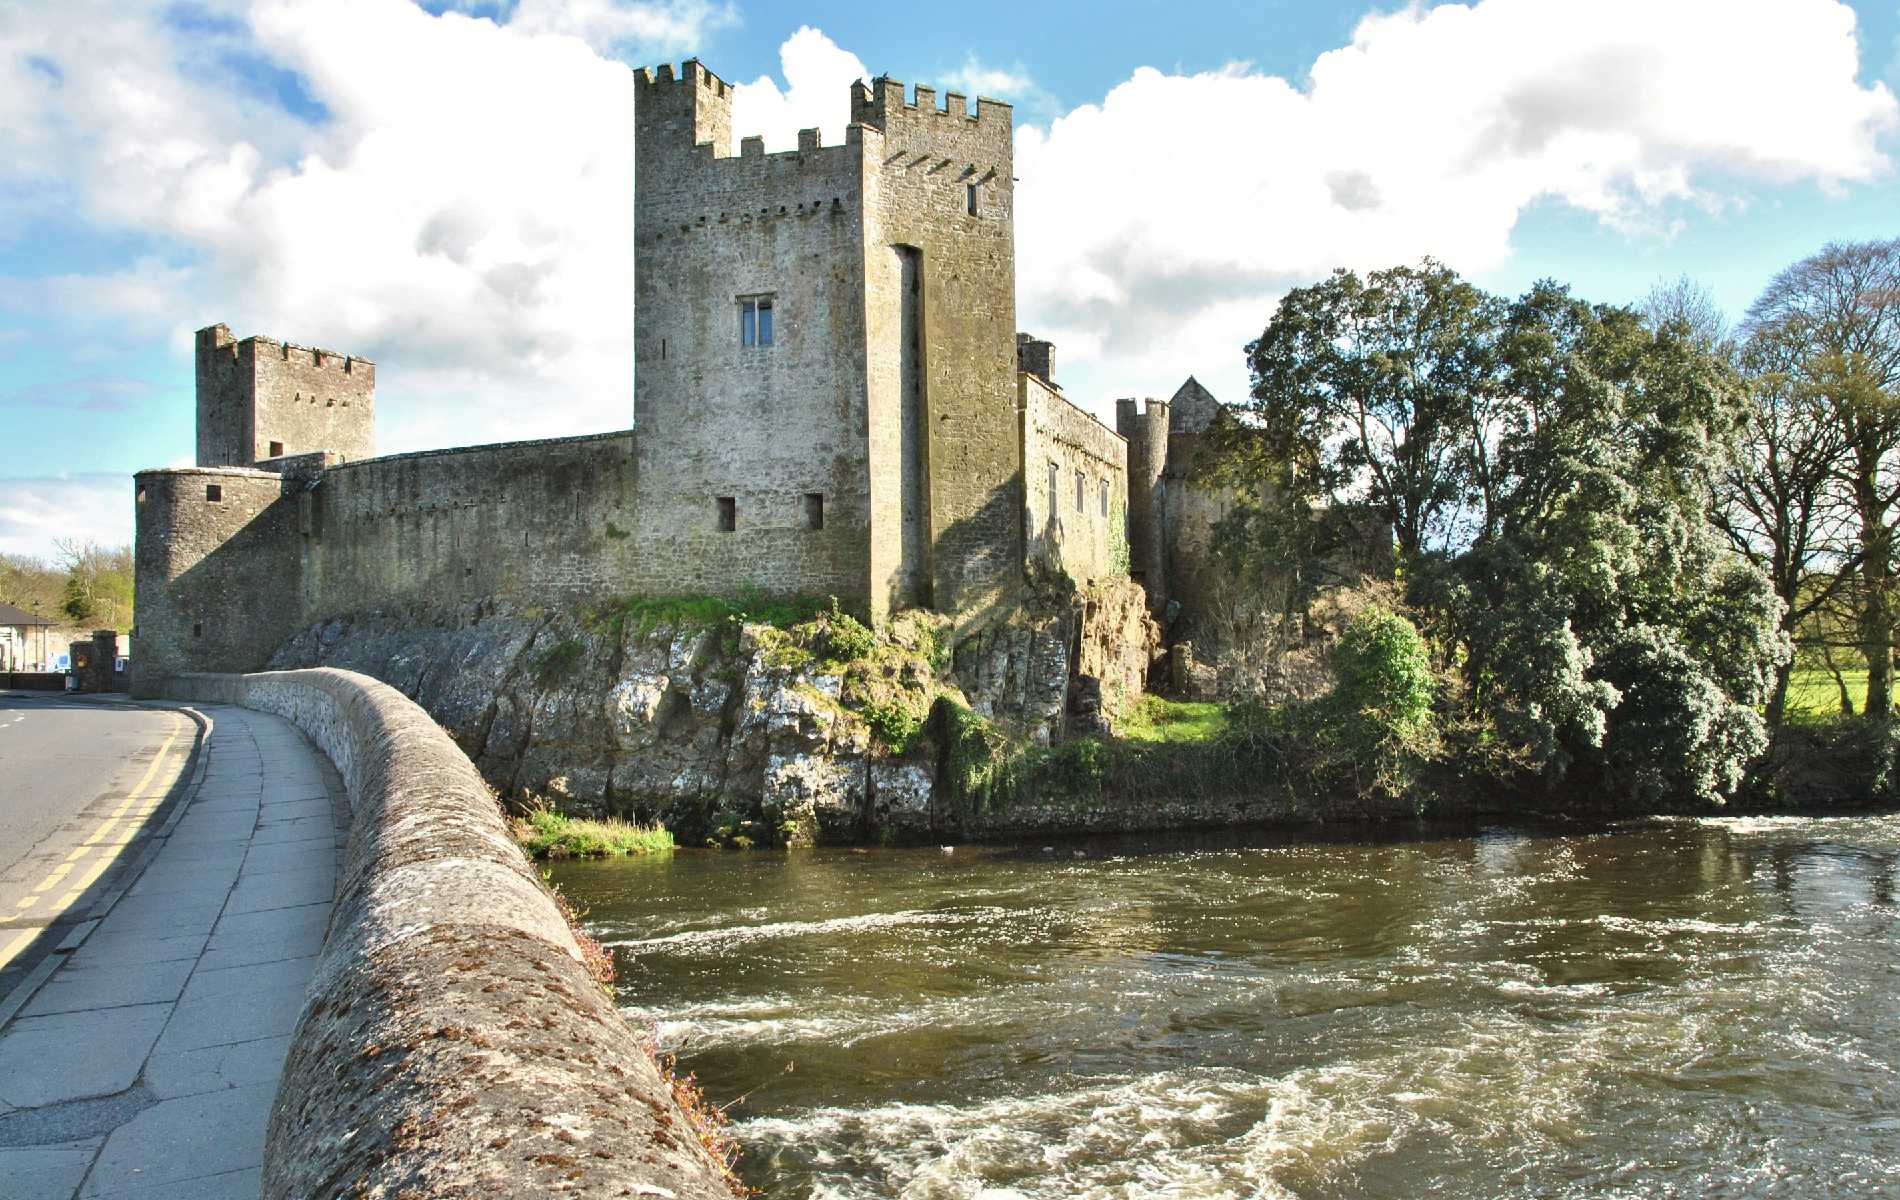 Cahir Castle – 10 things you need to know before your visit